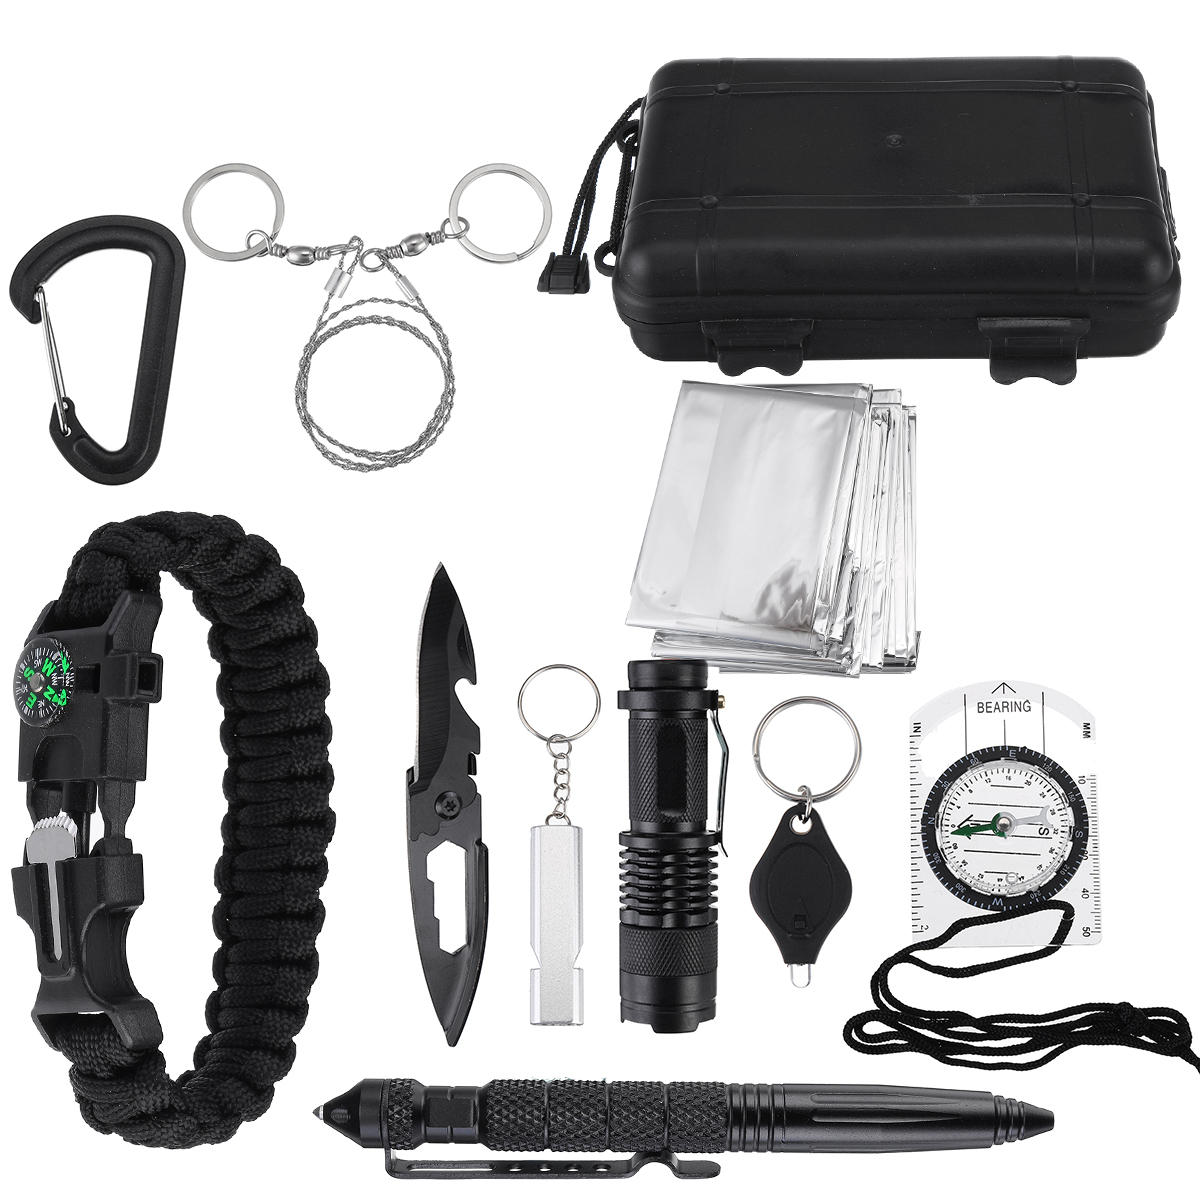 SOS Survival Emergency Kit Multi Tool for Outdoor Camping Hiking